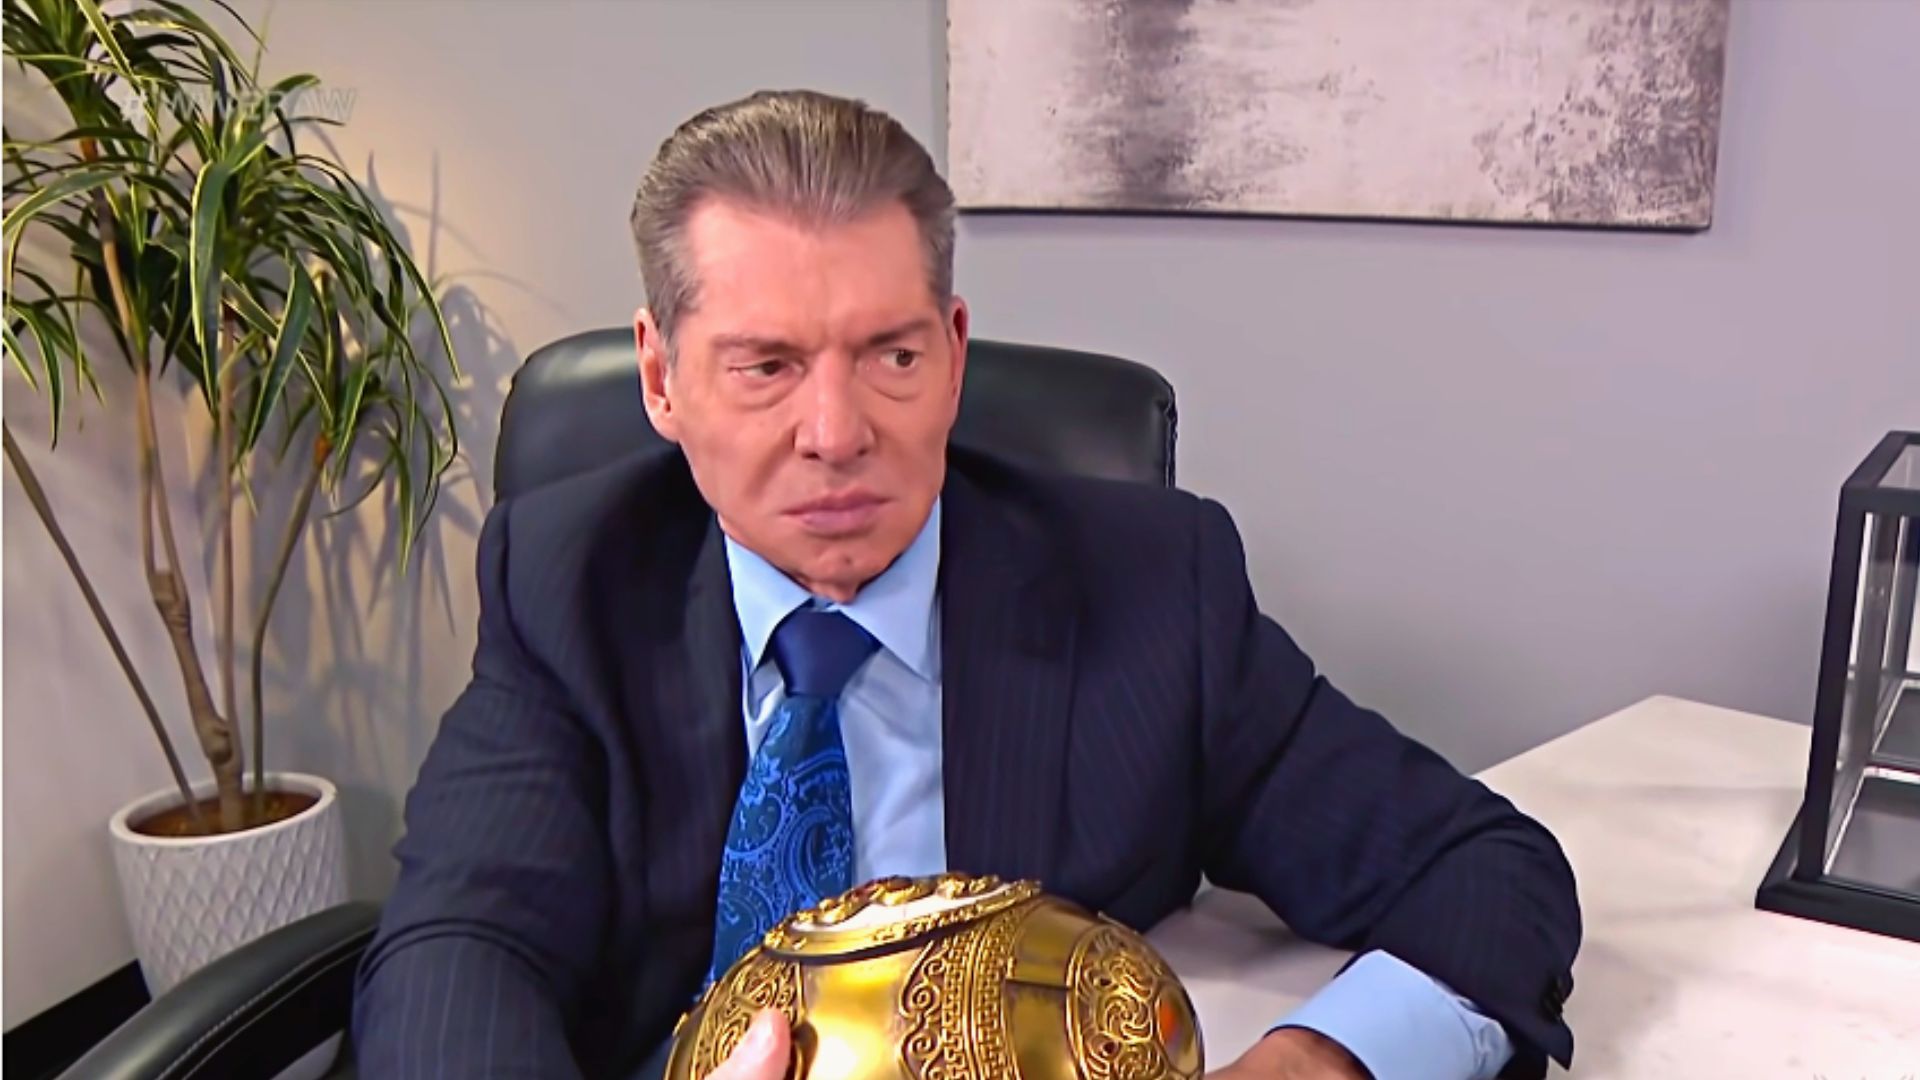 Vince McMahon played a role in a legend getting a huge contract with a rival